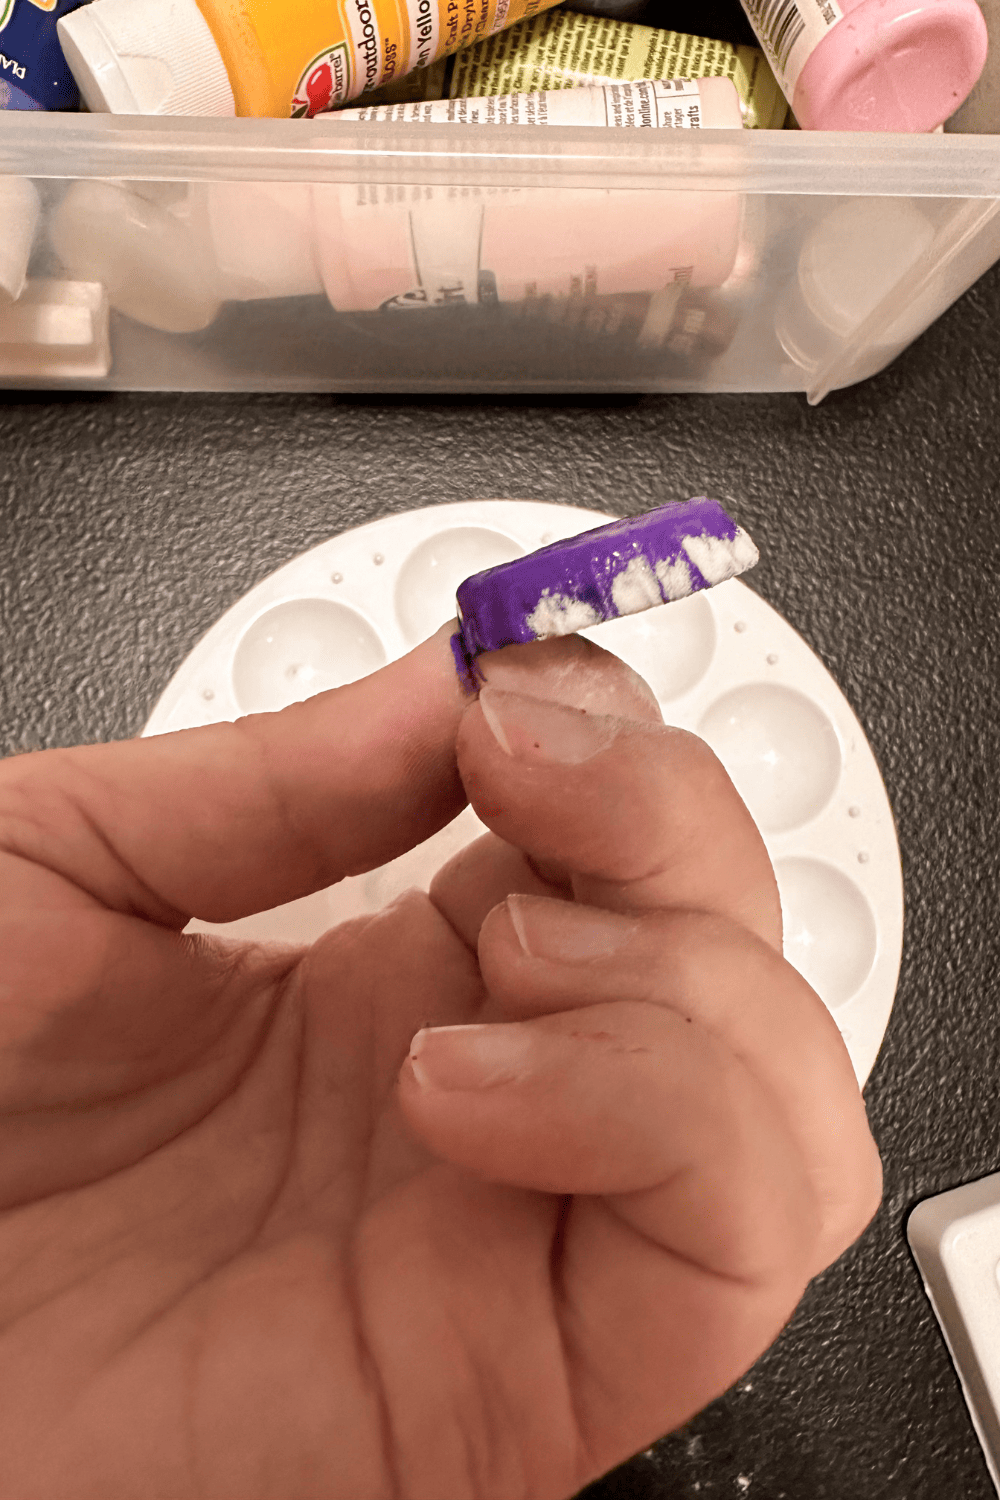 hand holding a bottle cap painted purple with baking soda on the edge